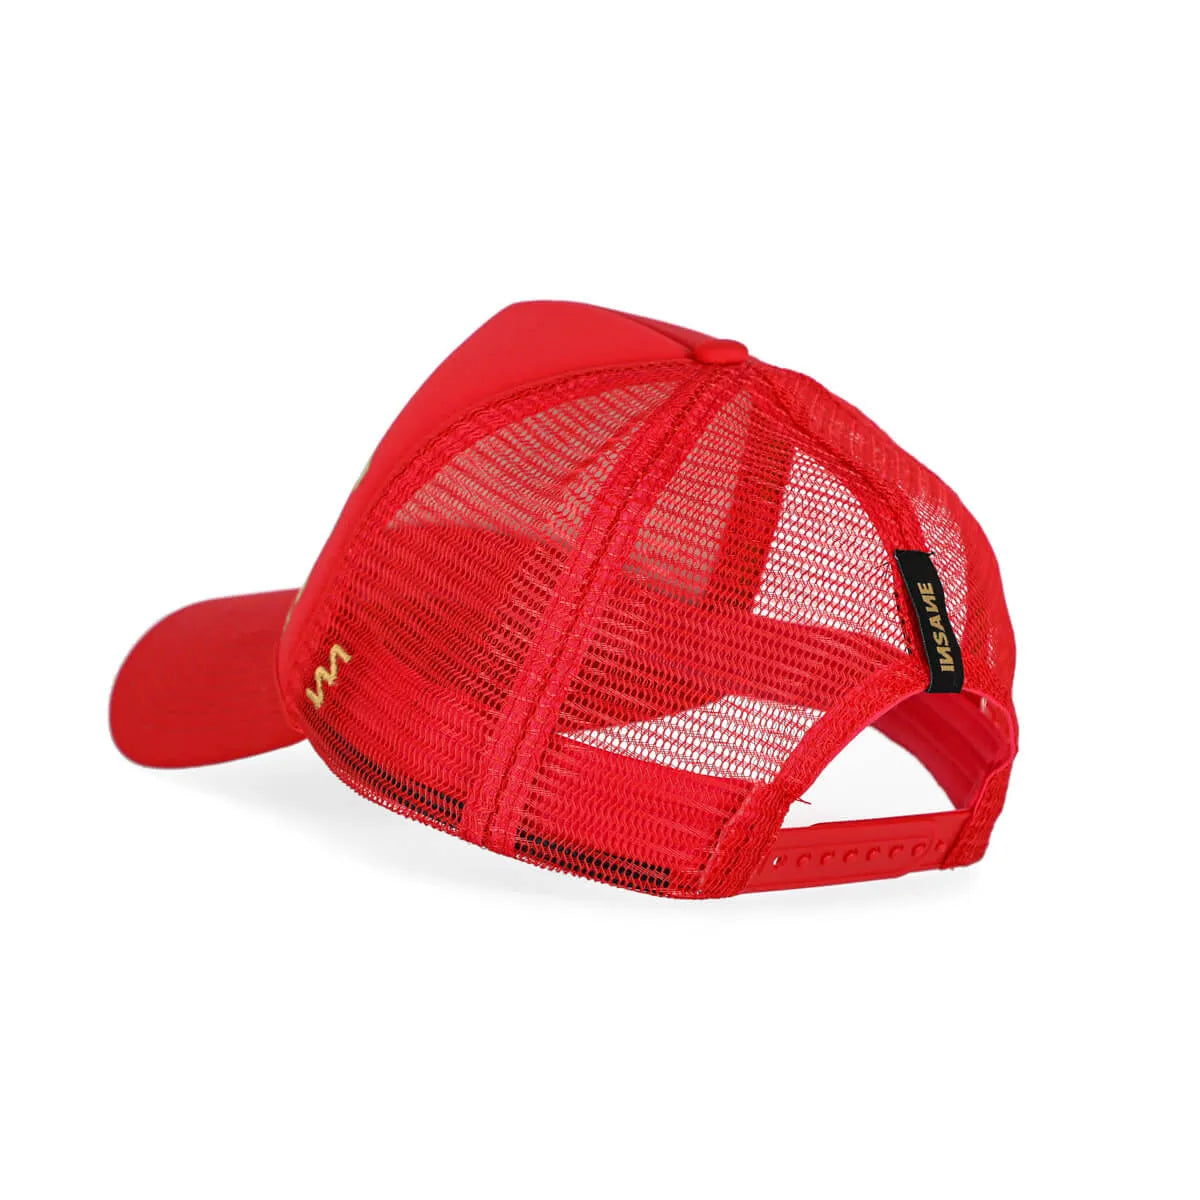 FREE TRUCKER CORAL & GOLD CAP